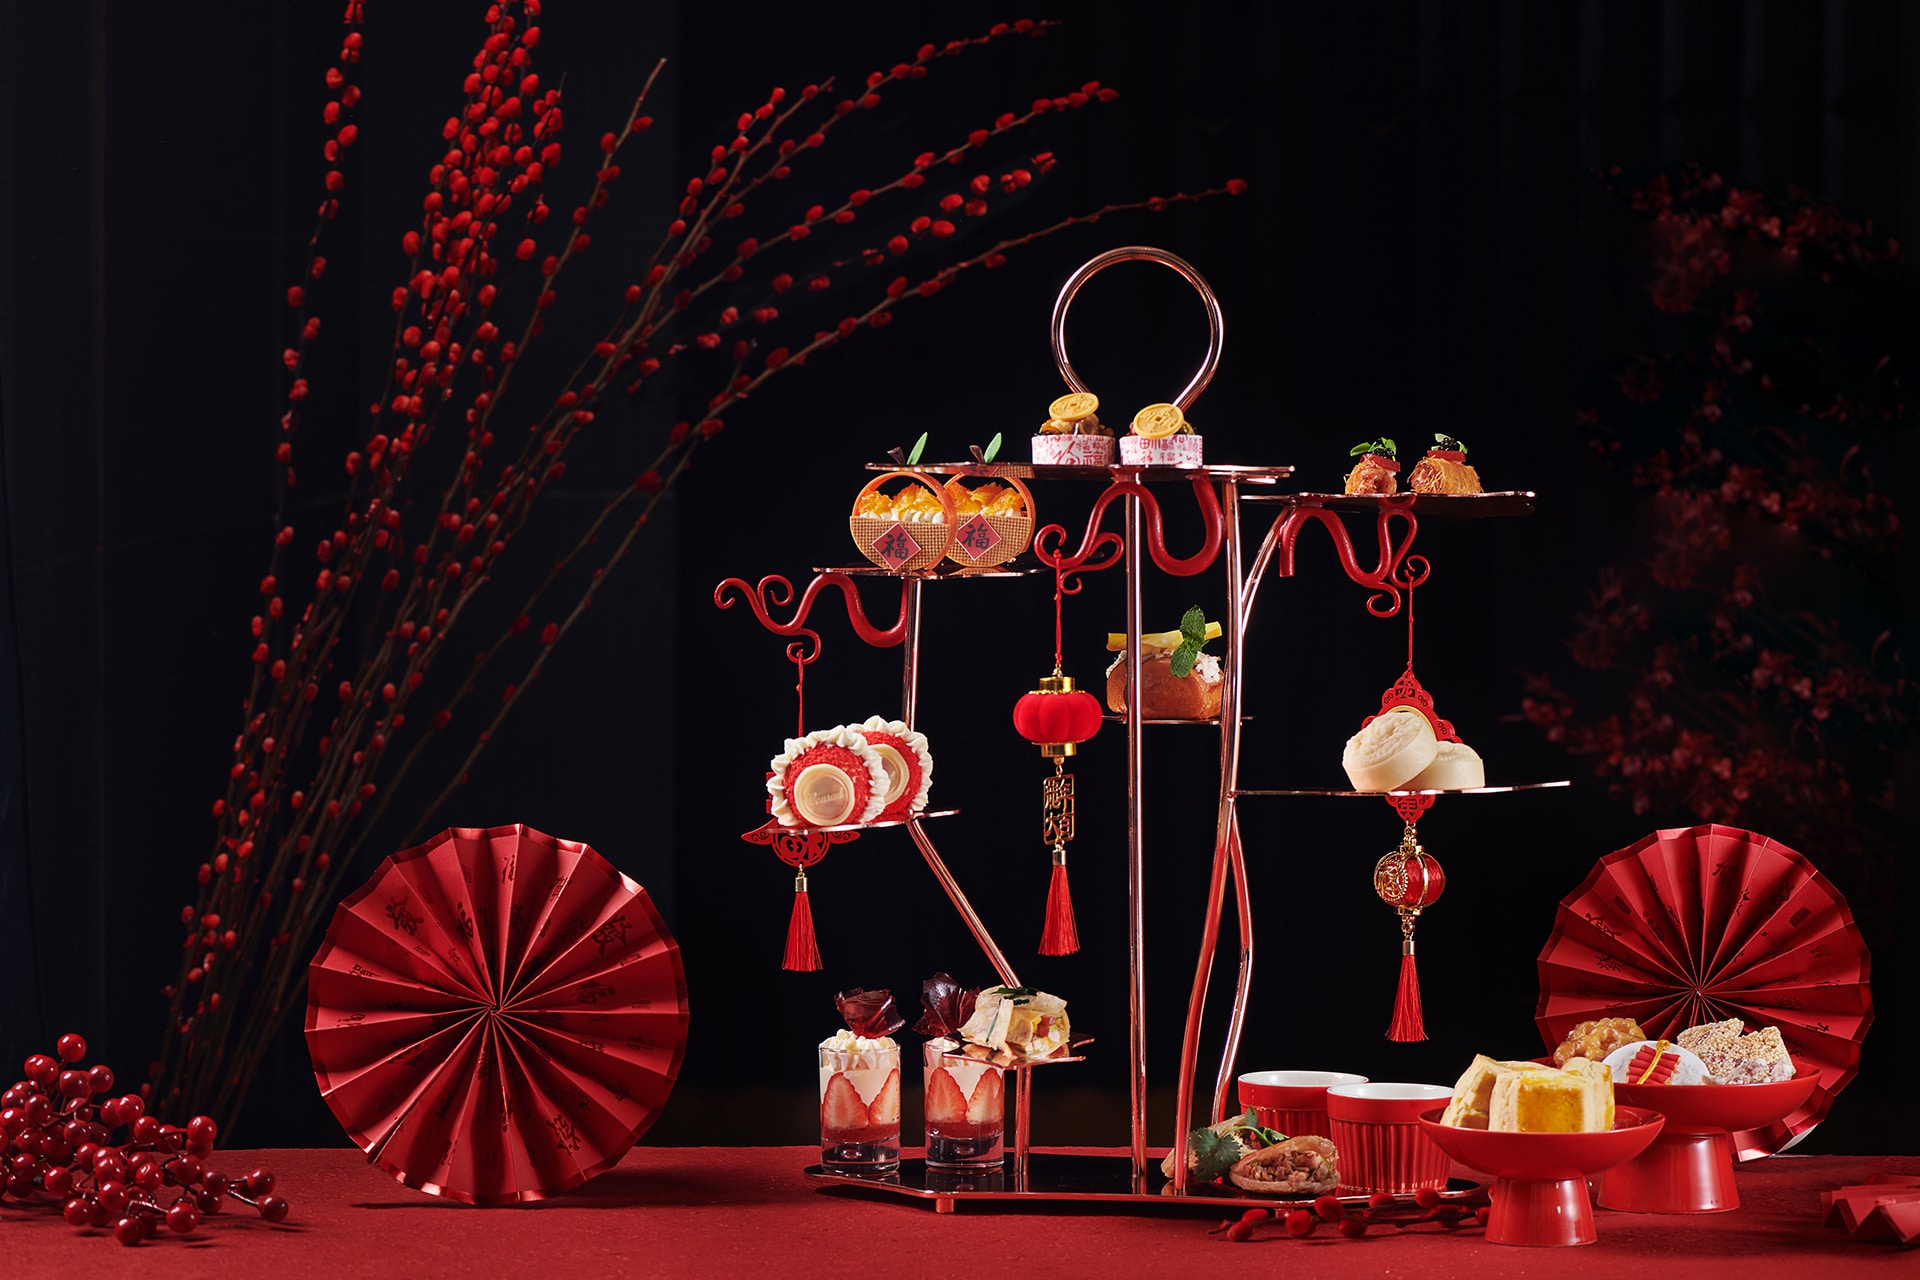 Enjoy the New Year: Kangkang Xiong invites you to taste the “Dragon Inspiration? Prosperity Flying” New Year Afternoon Tea